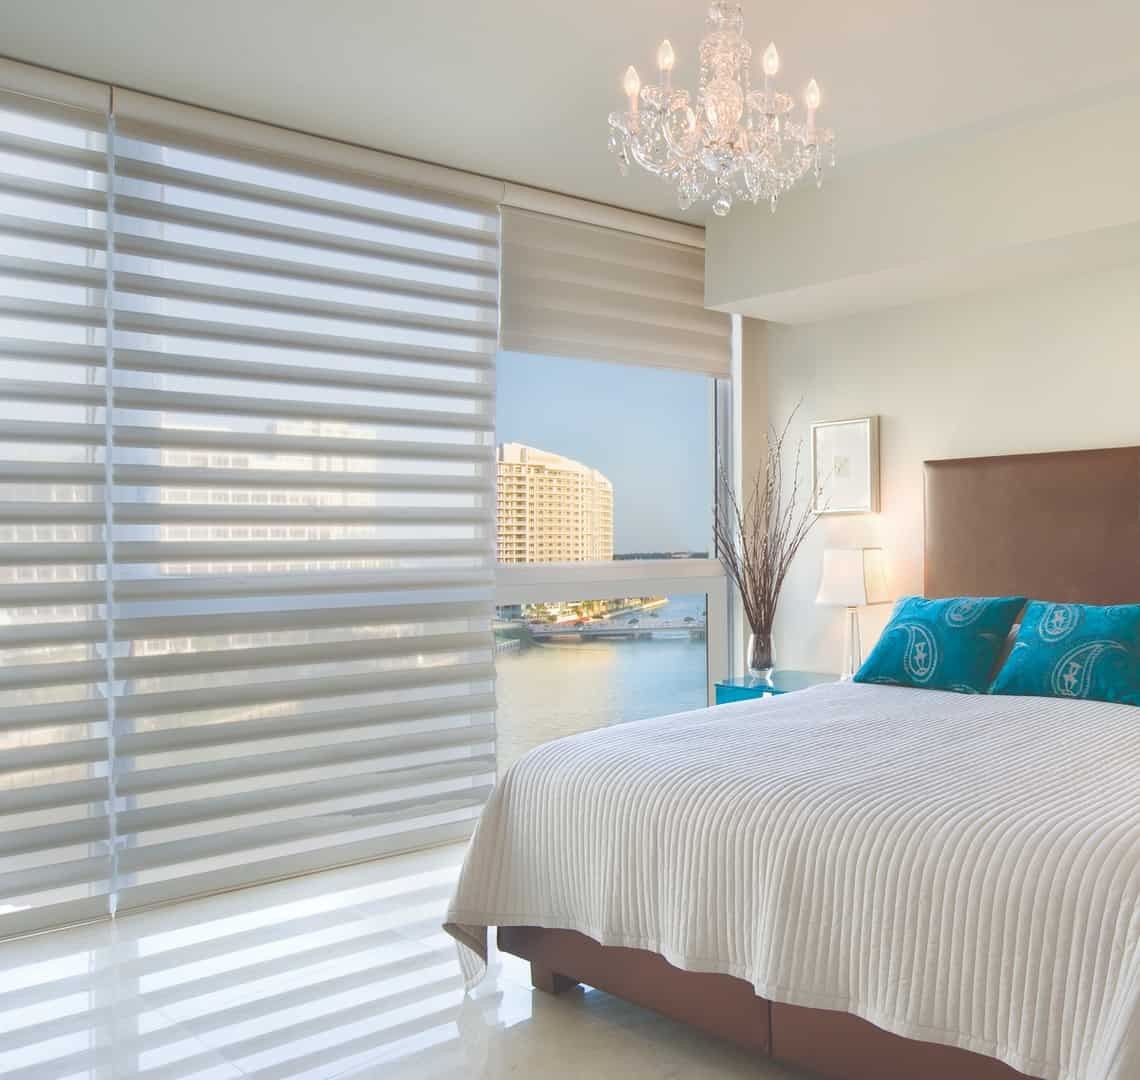 Hunter Douglas Pirouette® Window Shadings, updating your home for spring near Redwood City, California (CA).